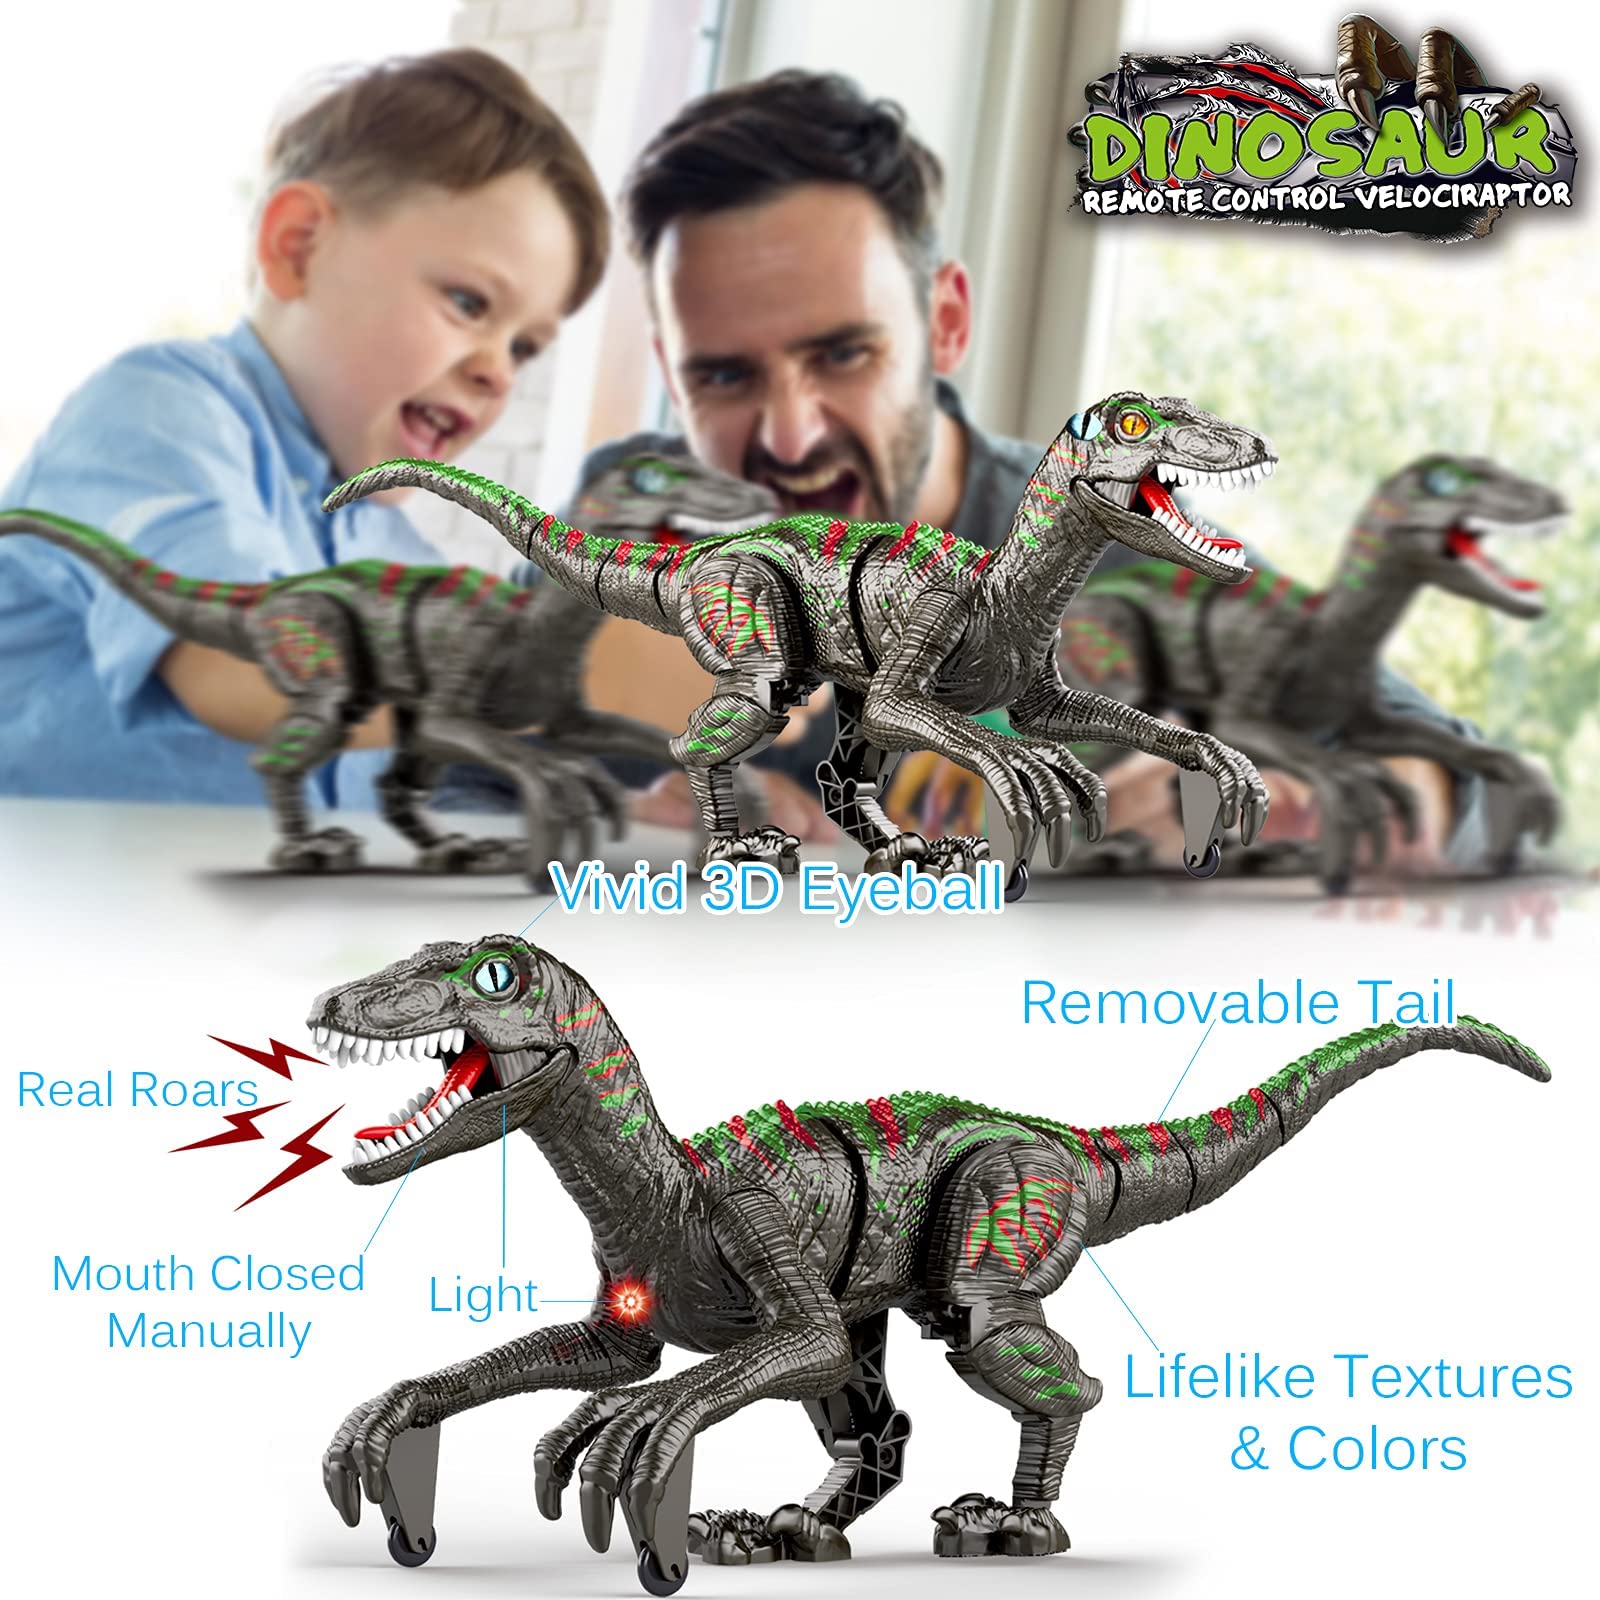 Happitry Remote Control Dinosaur Toys for Kids 5-7, RC Dino Toy Gifts for Boys 4-7-8-12, Big Robot Walking Velociraptor with Realistic Light Roar 2.4G Rechargeable